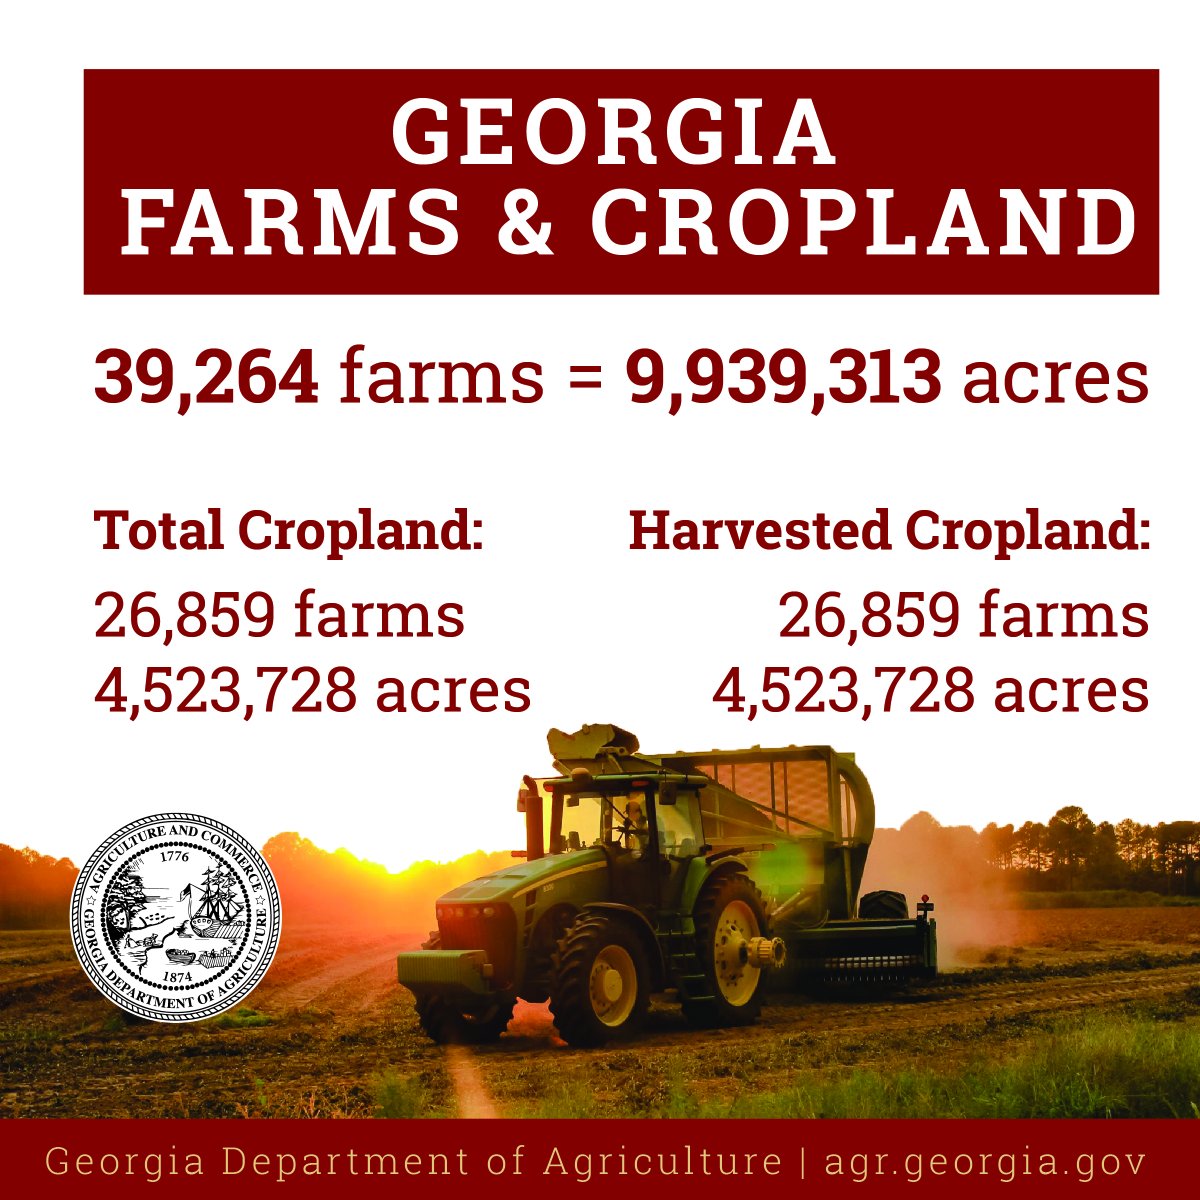 Georgia's agricultural landscape is impressive. With over 4 million acres of cropland, our state's farms play a vital role in feeding the state & nation. #Georgia #Agriculture #Farming #Crops #Land